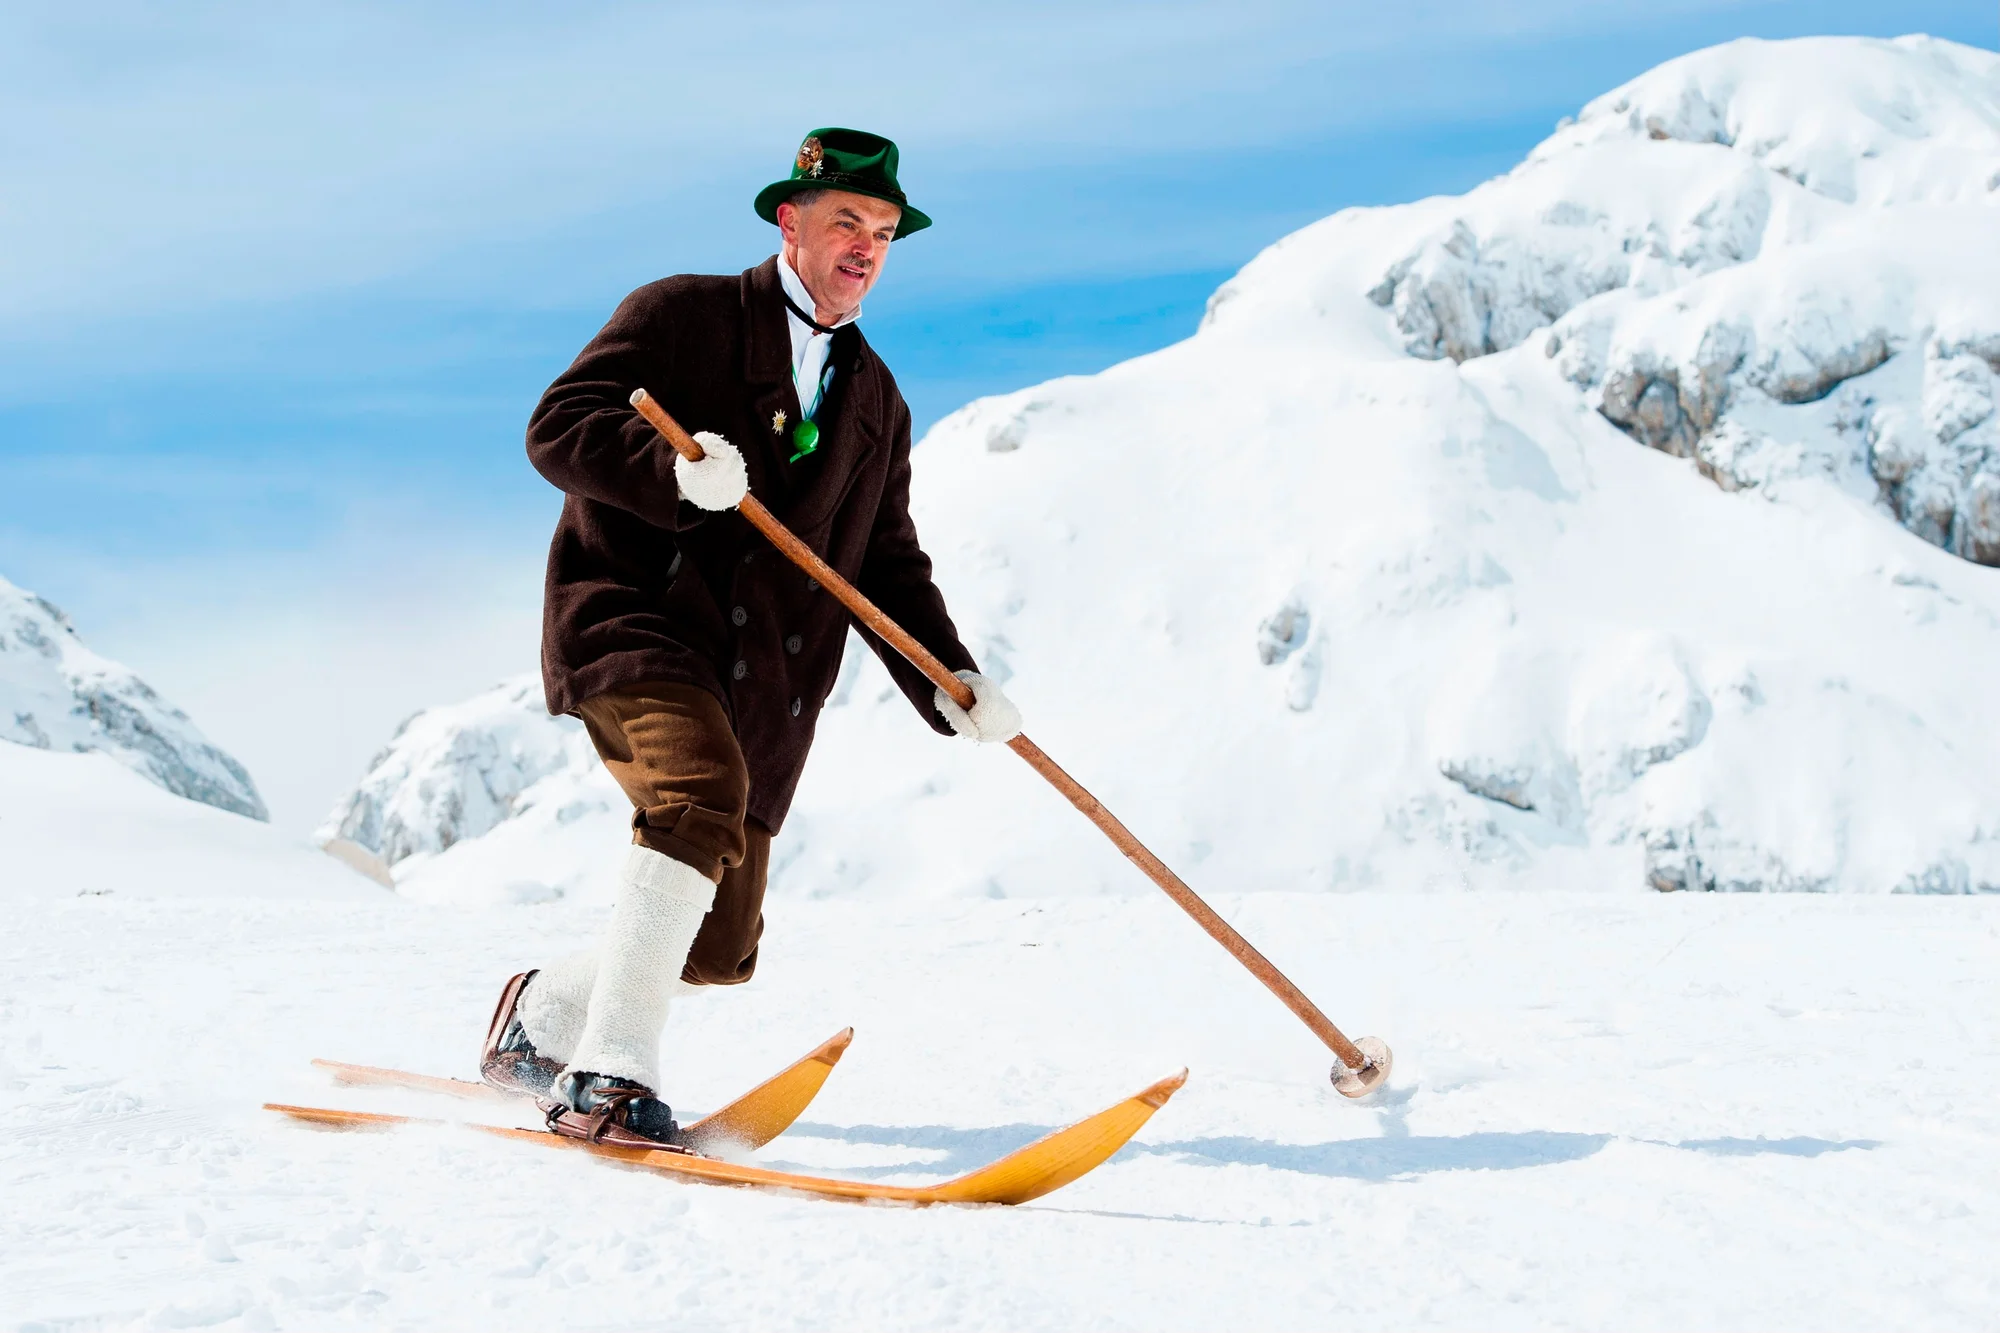 A picture of a man skiing in the snow with vintage skis and holding one large wooden pole